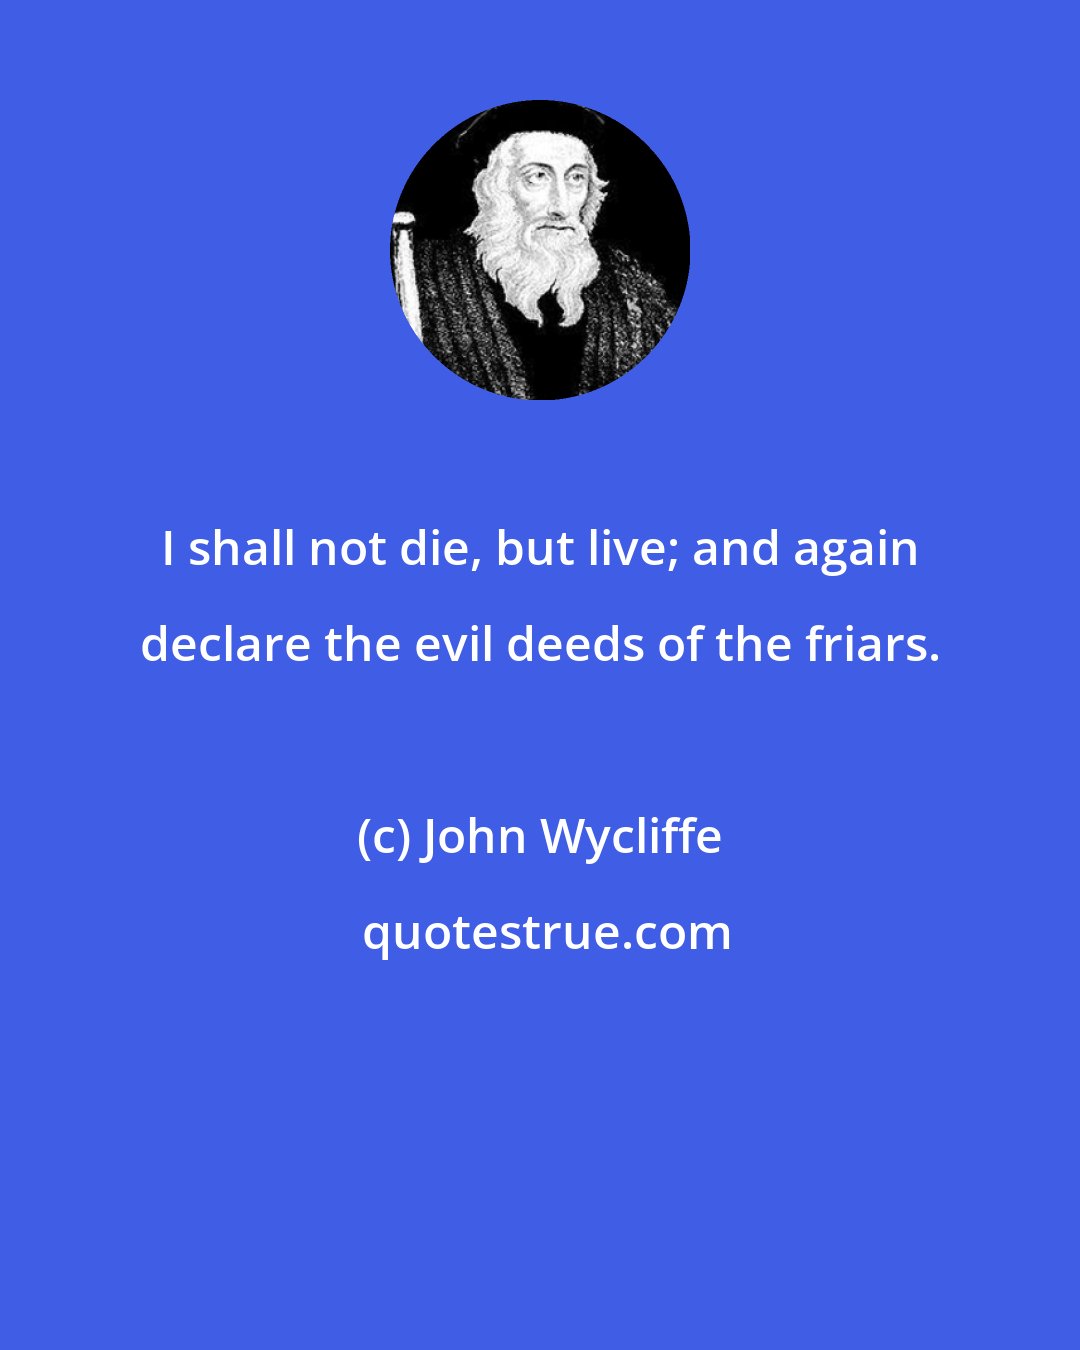 John Wycliffe: I shall not die, but live; and again declare the evil deeds of the friars.